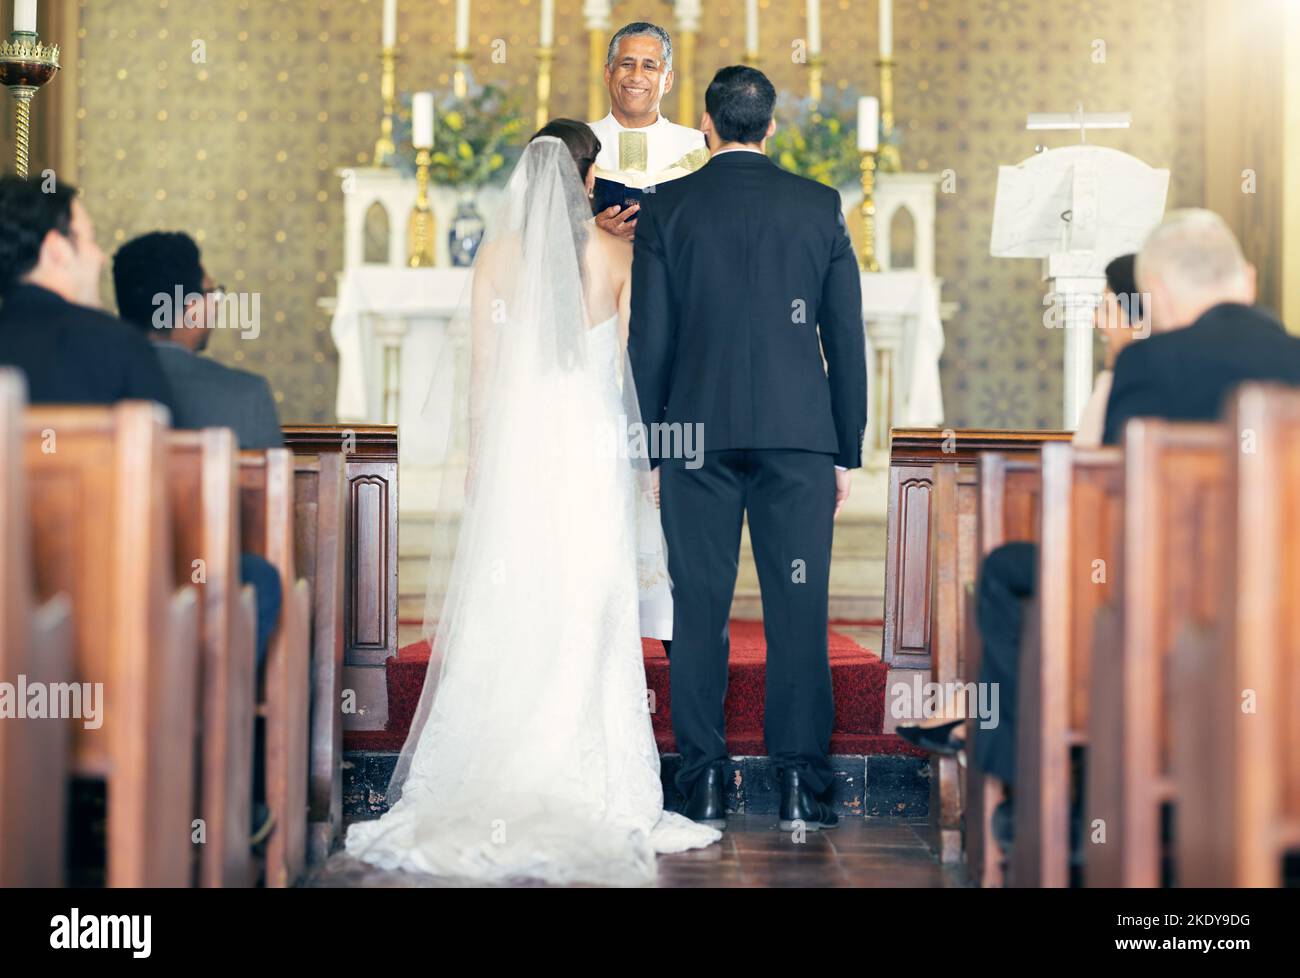 Wedding Priest And Couple At The Altar For Marriage Vows In Commitment